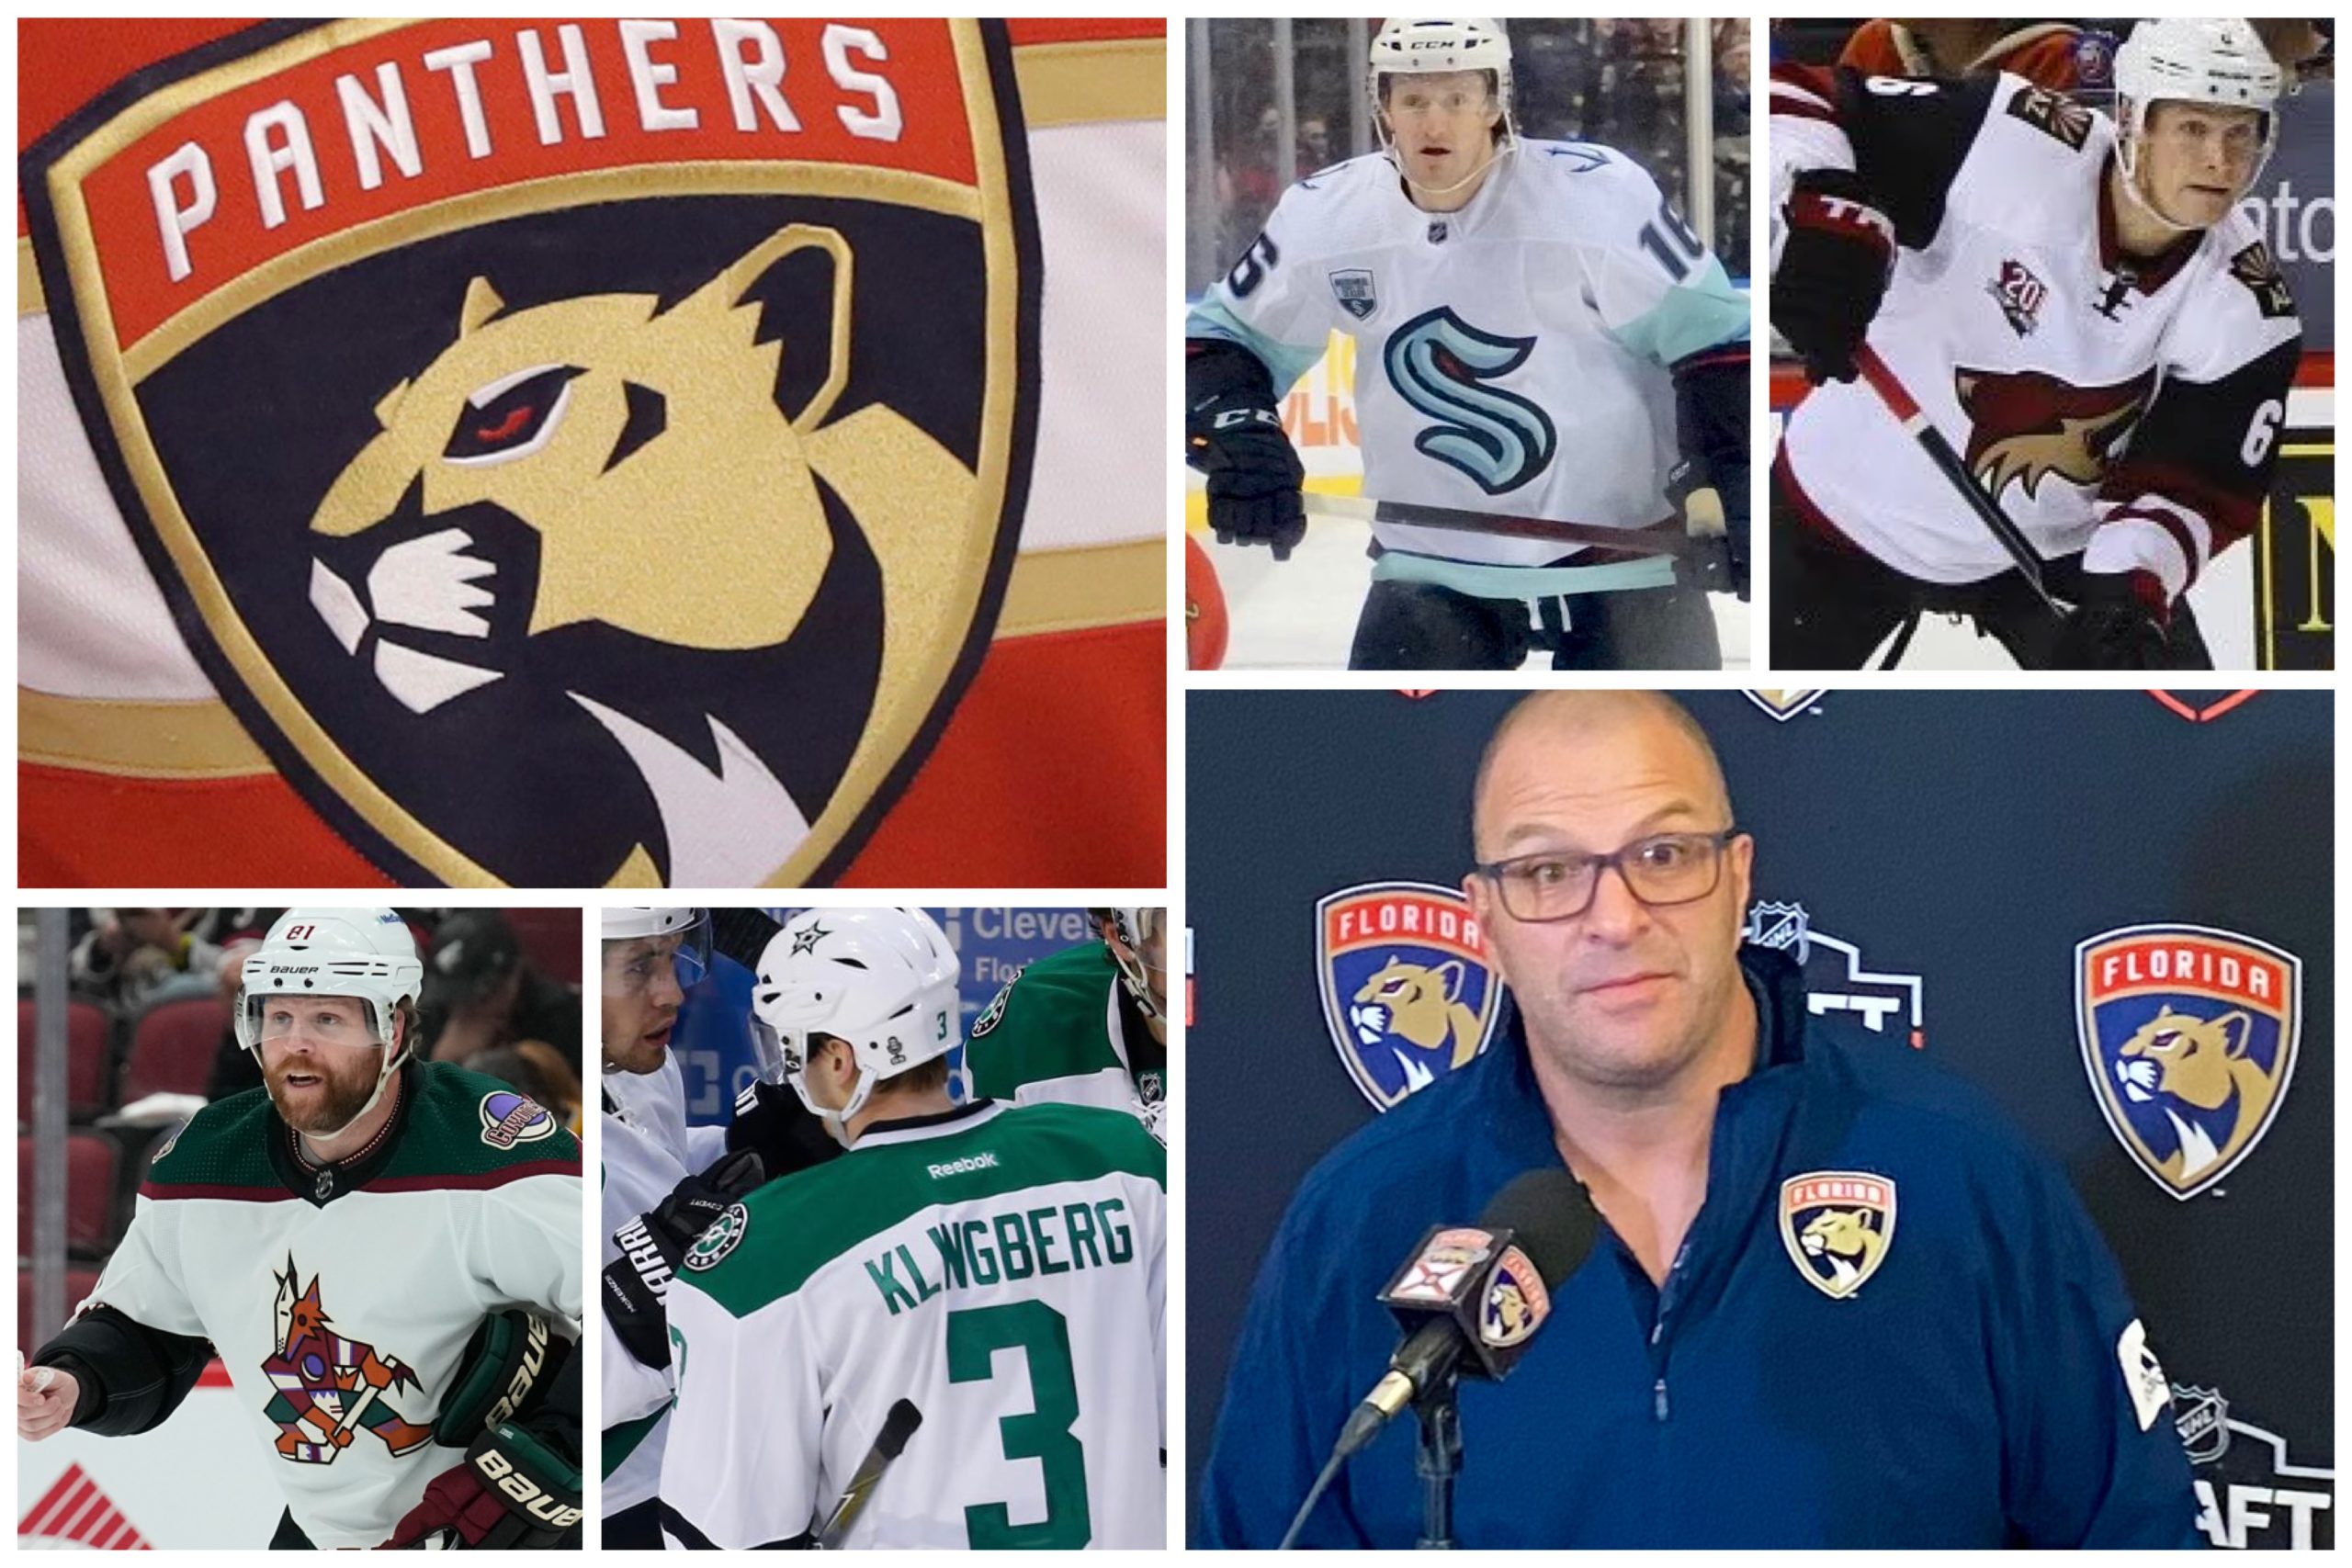 Nhl trade deadline panthers